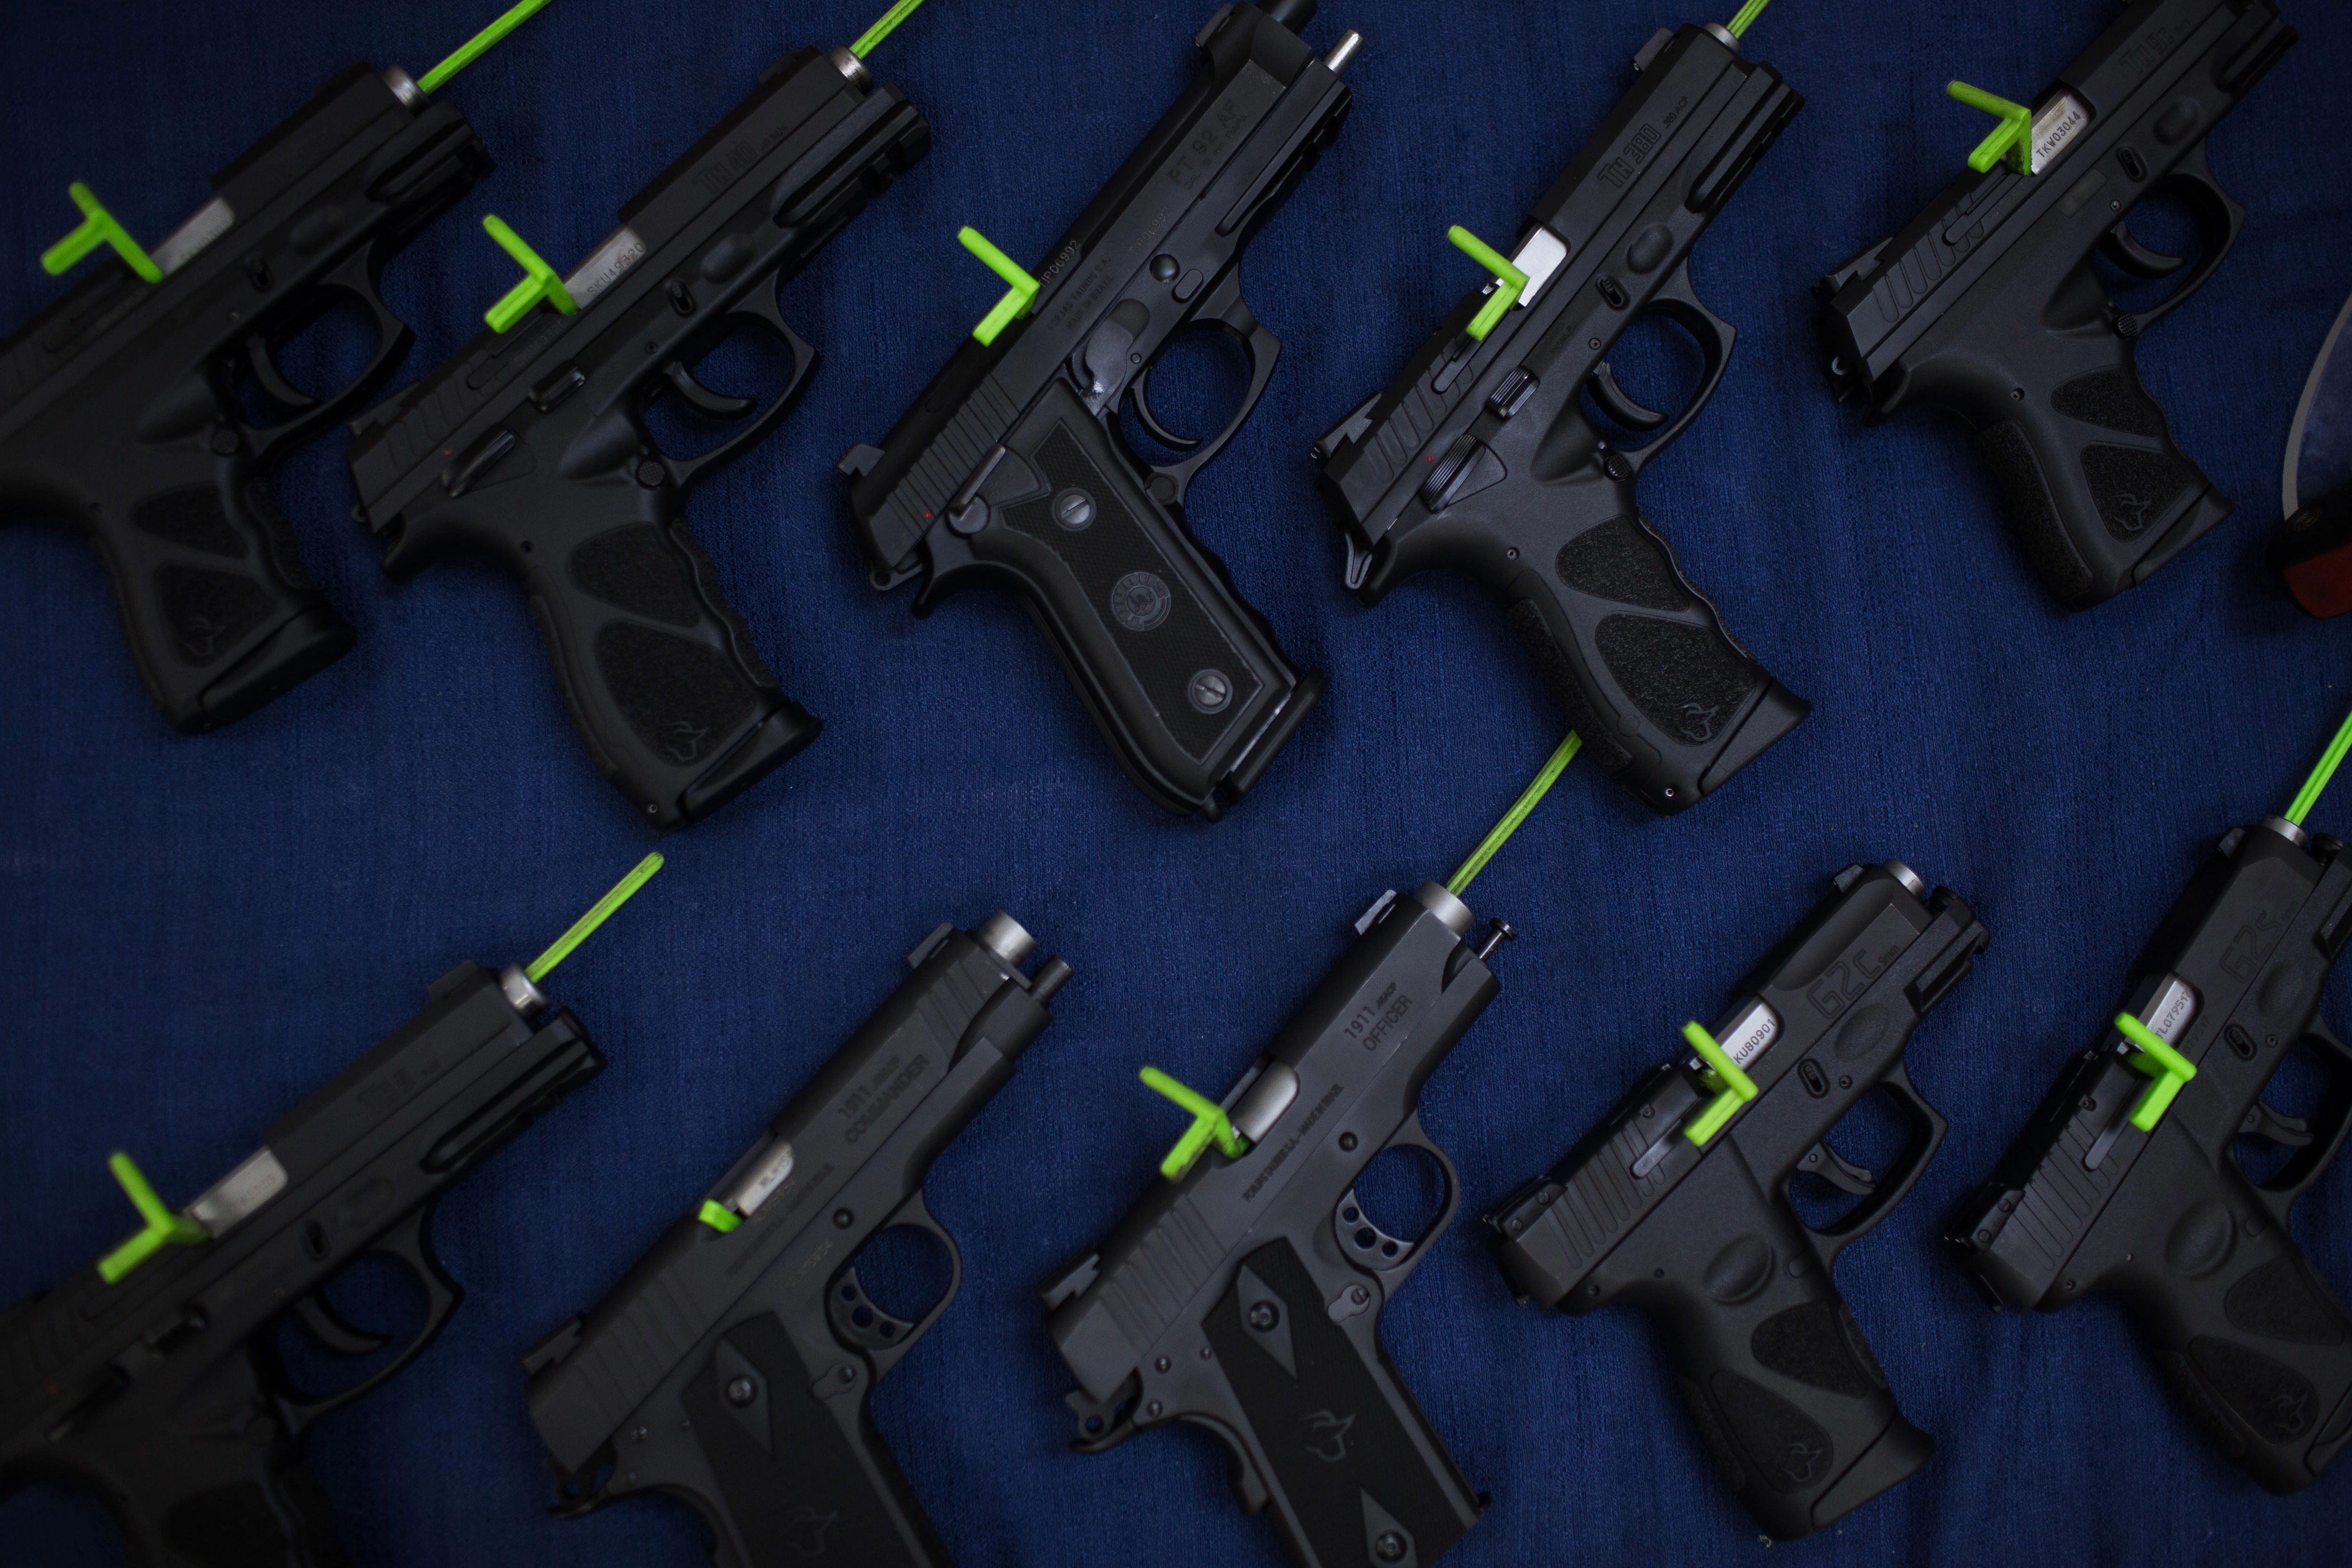 Handguns sit at the Forjas Taurus SA manufacturing facility in Sao Leopoldo, Brazil, on Tuesday, Feb. 5, 2019. Last month, Brazil's President Jair Bolsonaro signed a decree loosening the country's restrictive gun regulations, and hinted at further measures to arm law-abiding citizens to combat rampant crime. Photographer: Victor Moriyama/Bloomberg via Getty Images